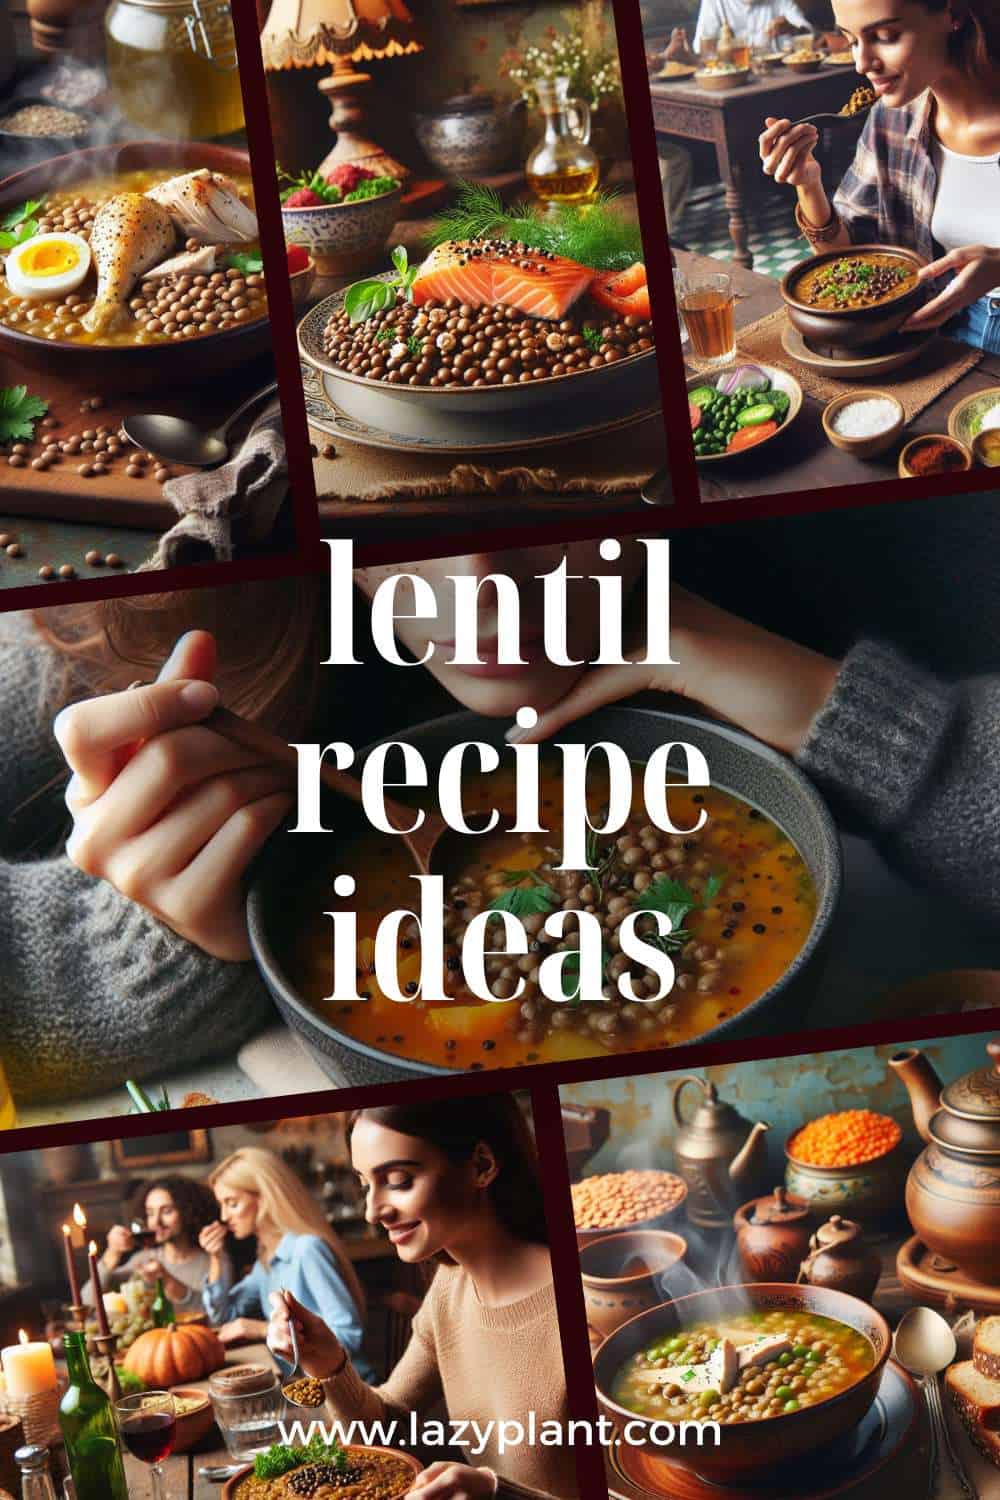 Lentils: High-protein meal ideas.